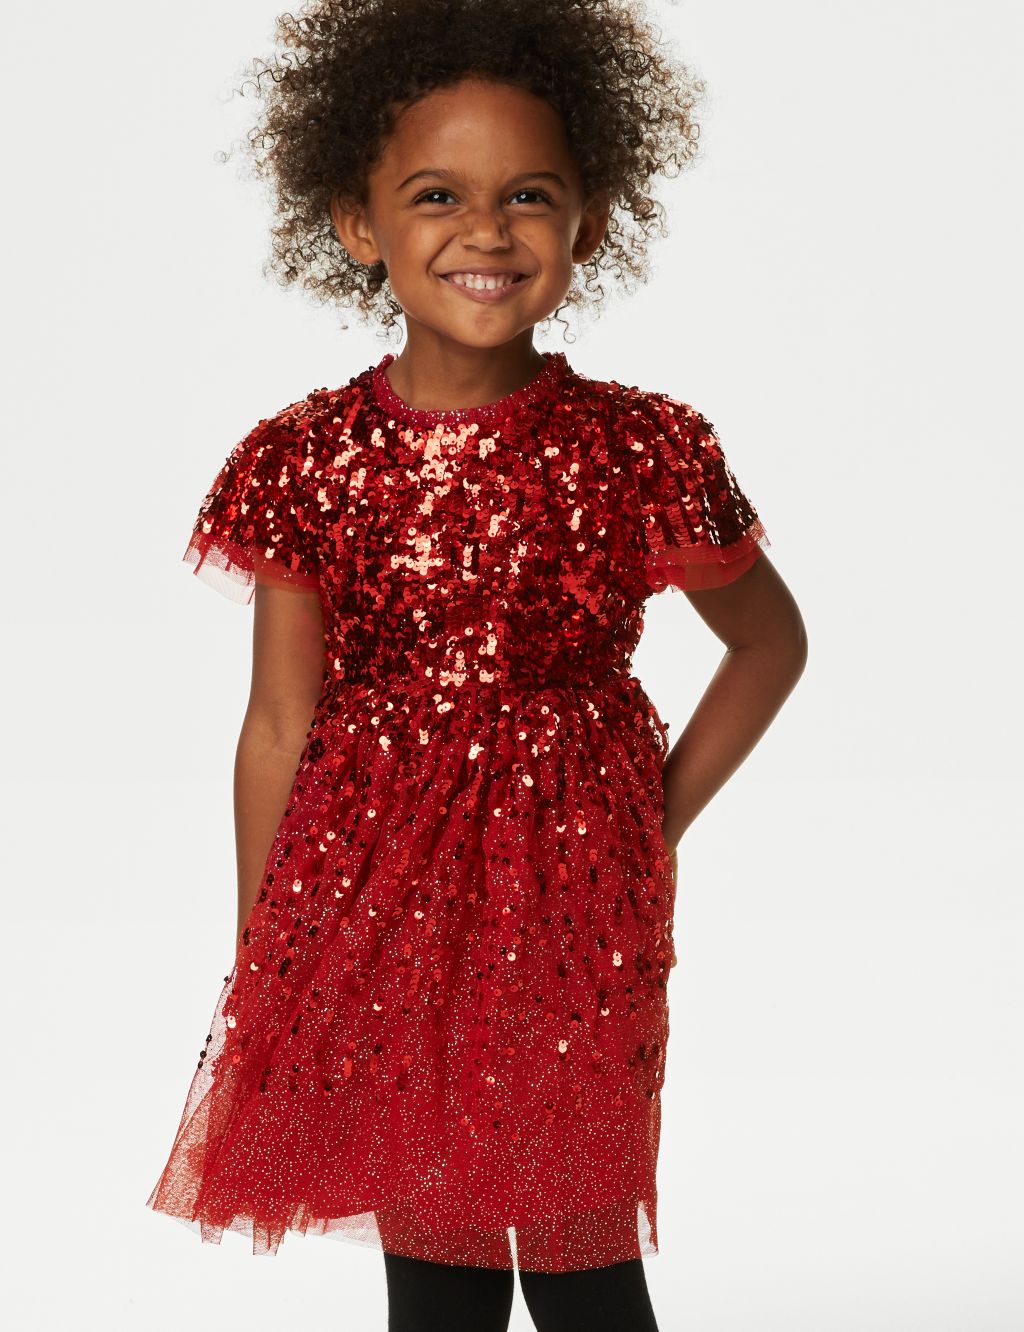 Sequin Tulle Party Dress (2-8 Yrs) image 1